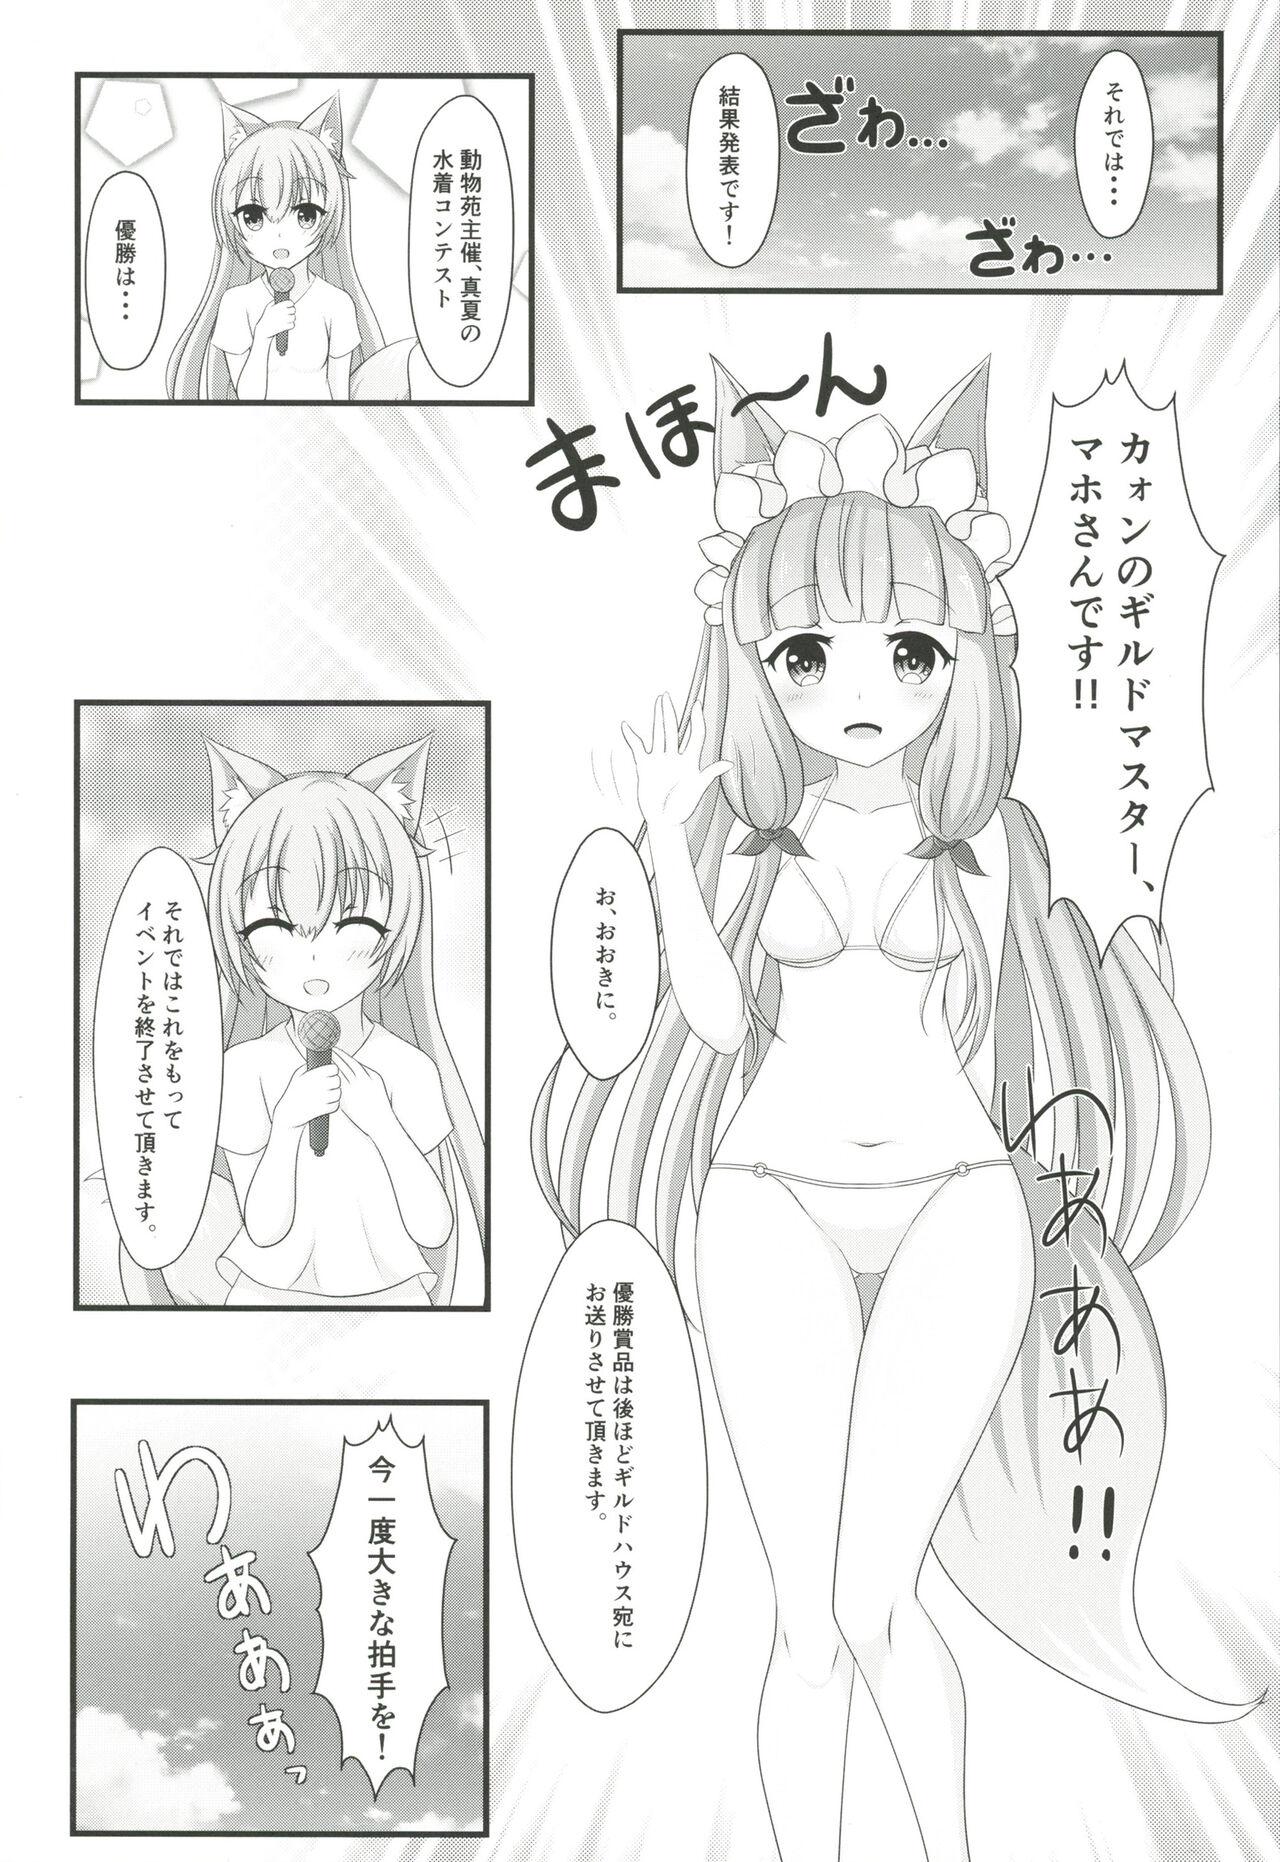 Body Massage Maho Hime Connect! 2 - Princess connect Hugecock - Page 3